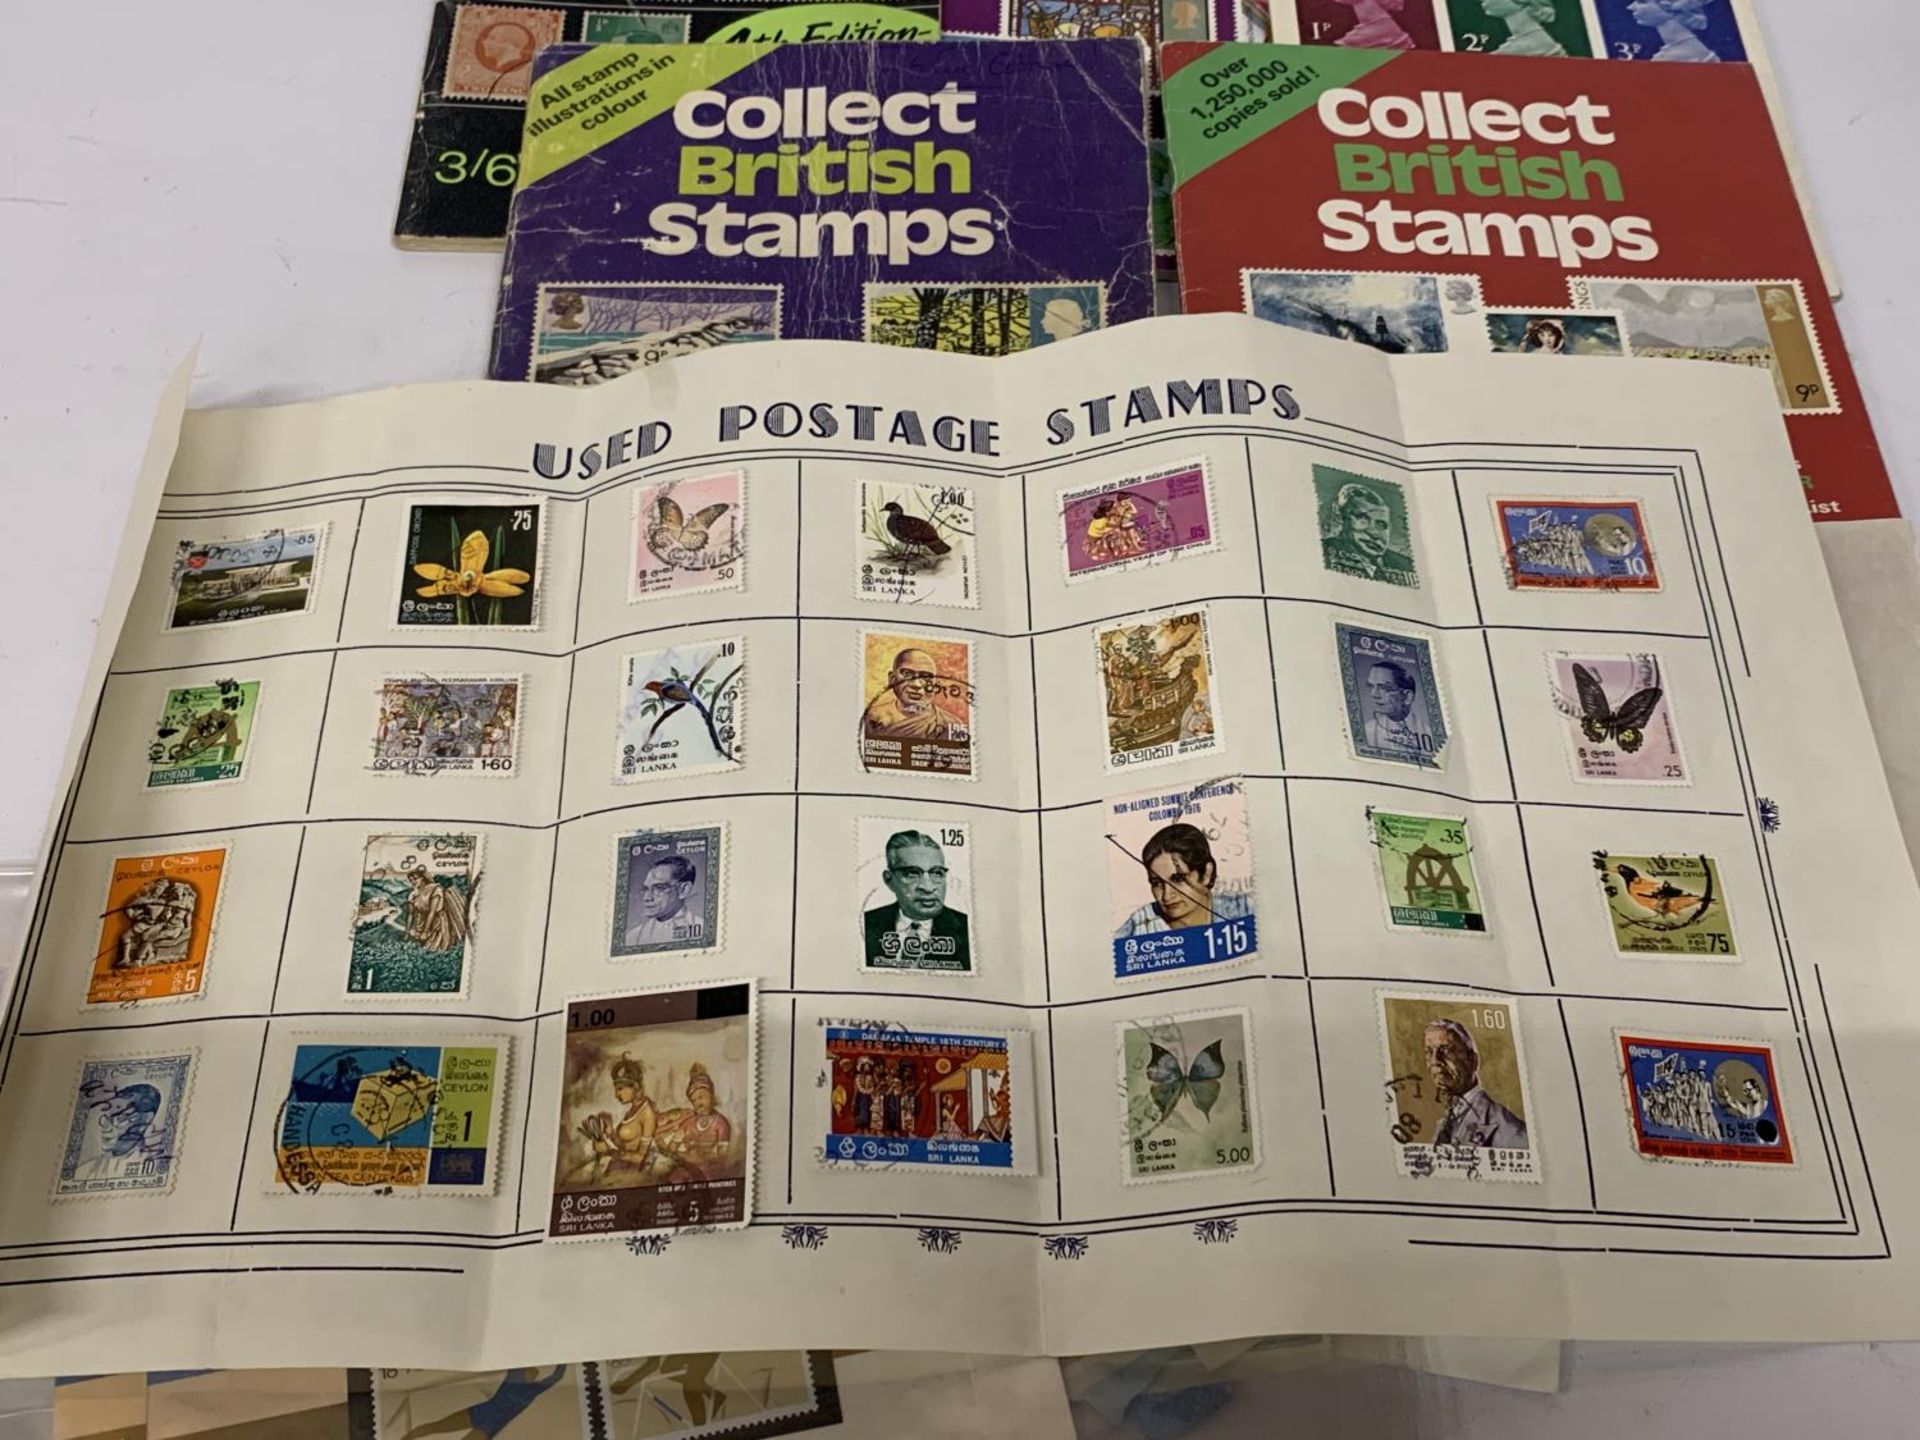 A QUANTITY OF BRITISH STAMP COLLECTOR'S BOOKS TOGETHER WITH A QUANTITY OF LOOSE STAMPS - Image 2 of 5